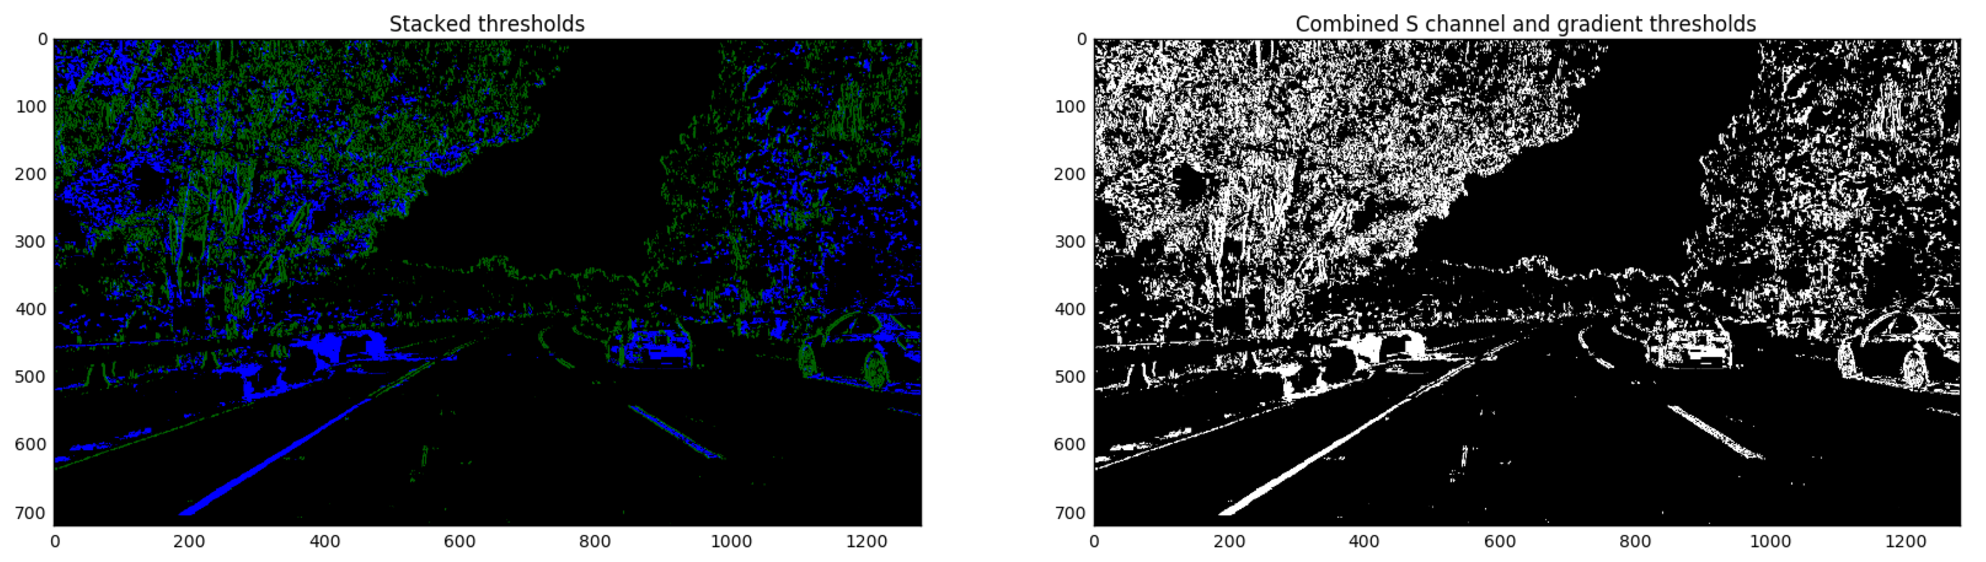 (Left) Stacked image; the green is the gradient threshold component and the blue is the color channel threshold component.
(Right) black and white combined thresholded image - this one has combined both gradient and color thresholds into one image.